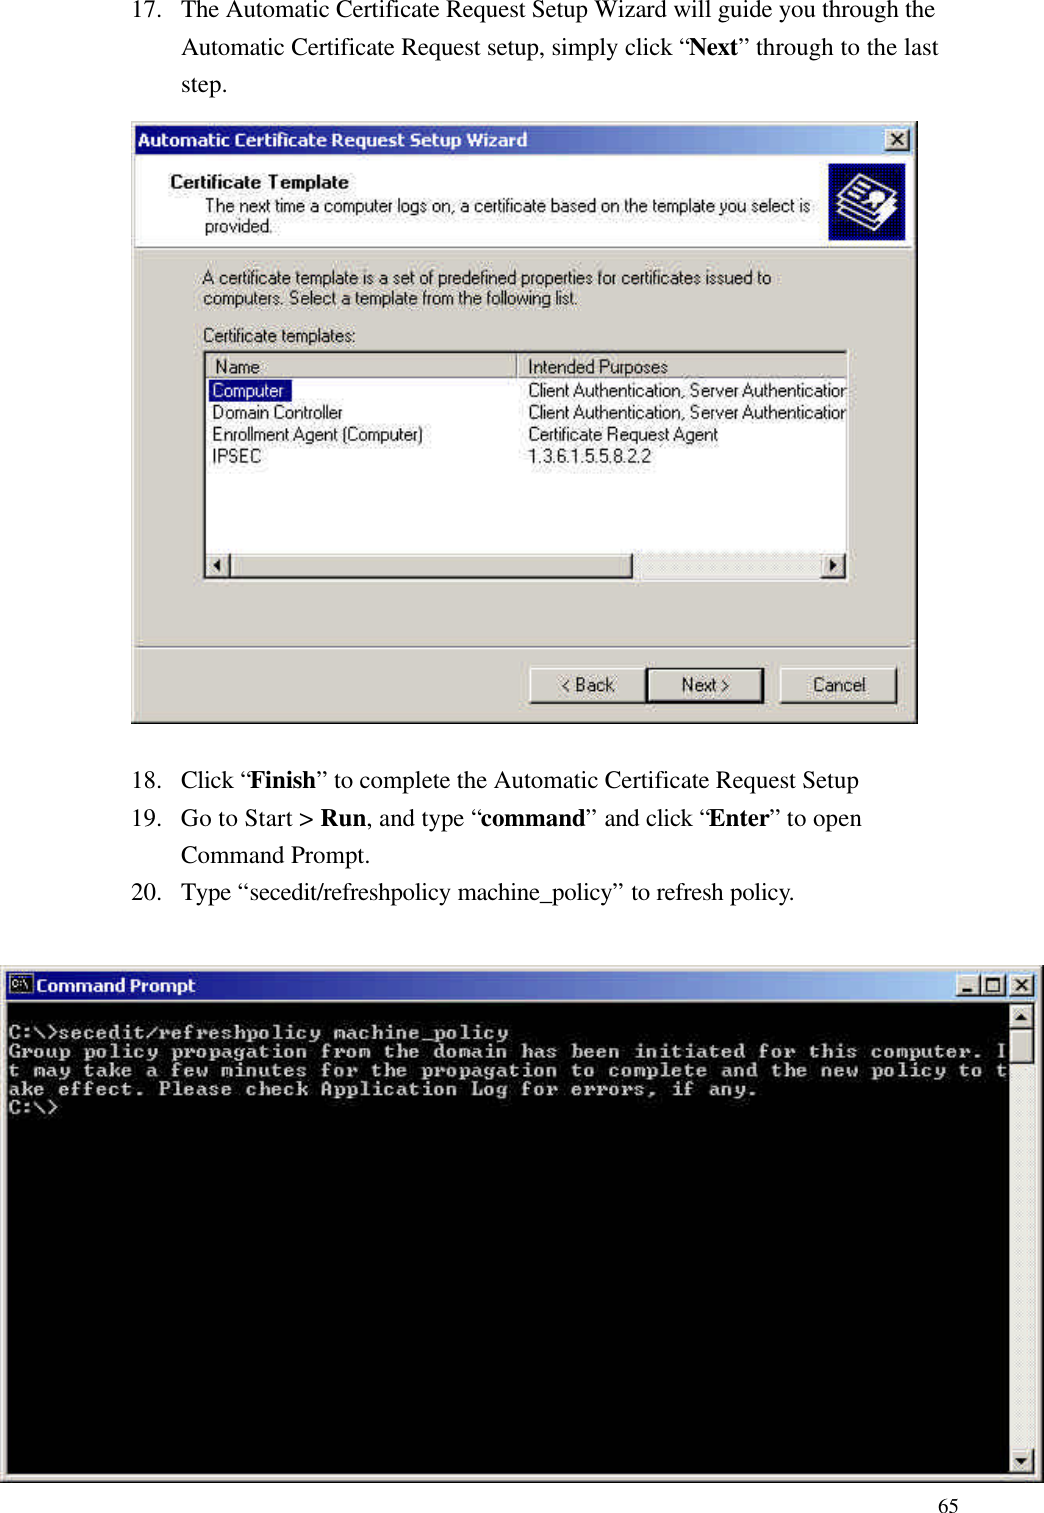  6517. The Automatic Certificate Request Setup Wizard will guide you through the Automatic Certificate Request setup, simply click “Next” through to the last step.    18. Click “Finish” to complete the Automatic Certificate Request Setup 19. Go to Start &gt; Run, and type “command” and click “Enter” to open Command Prompt. 20. Type “secedit/refreshpolicy machine_policy” to refresh policy.  